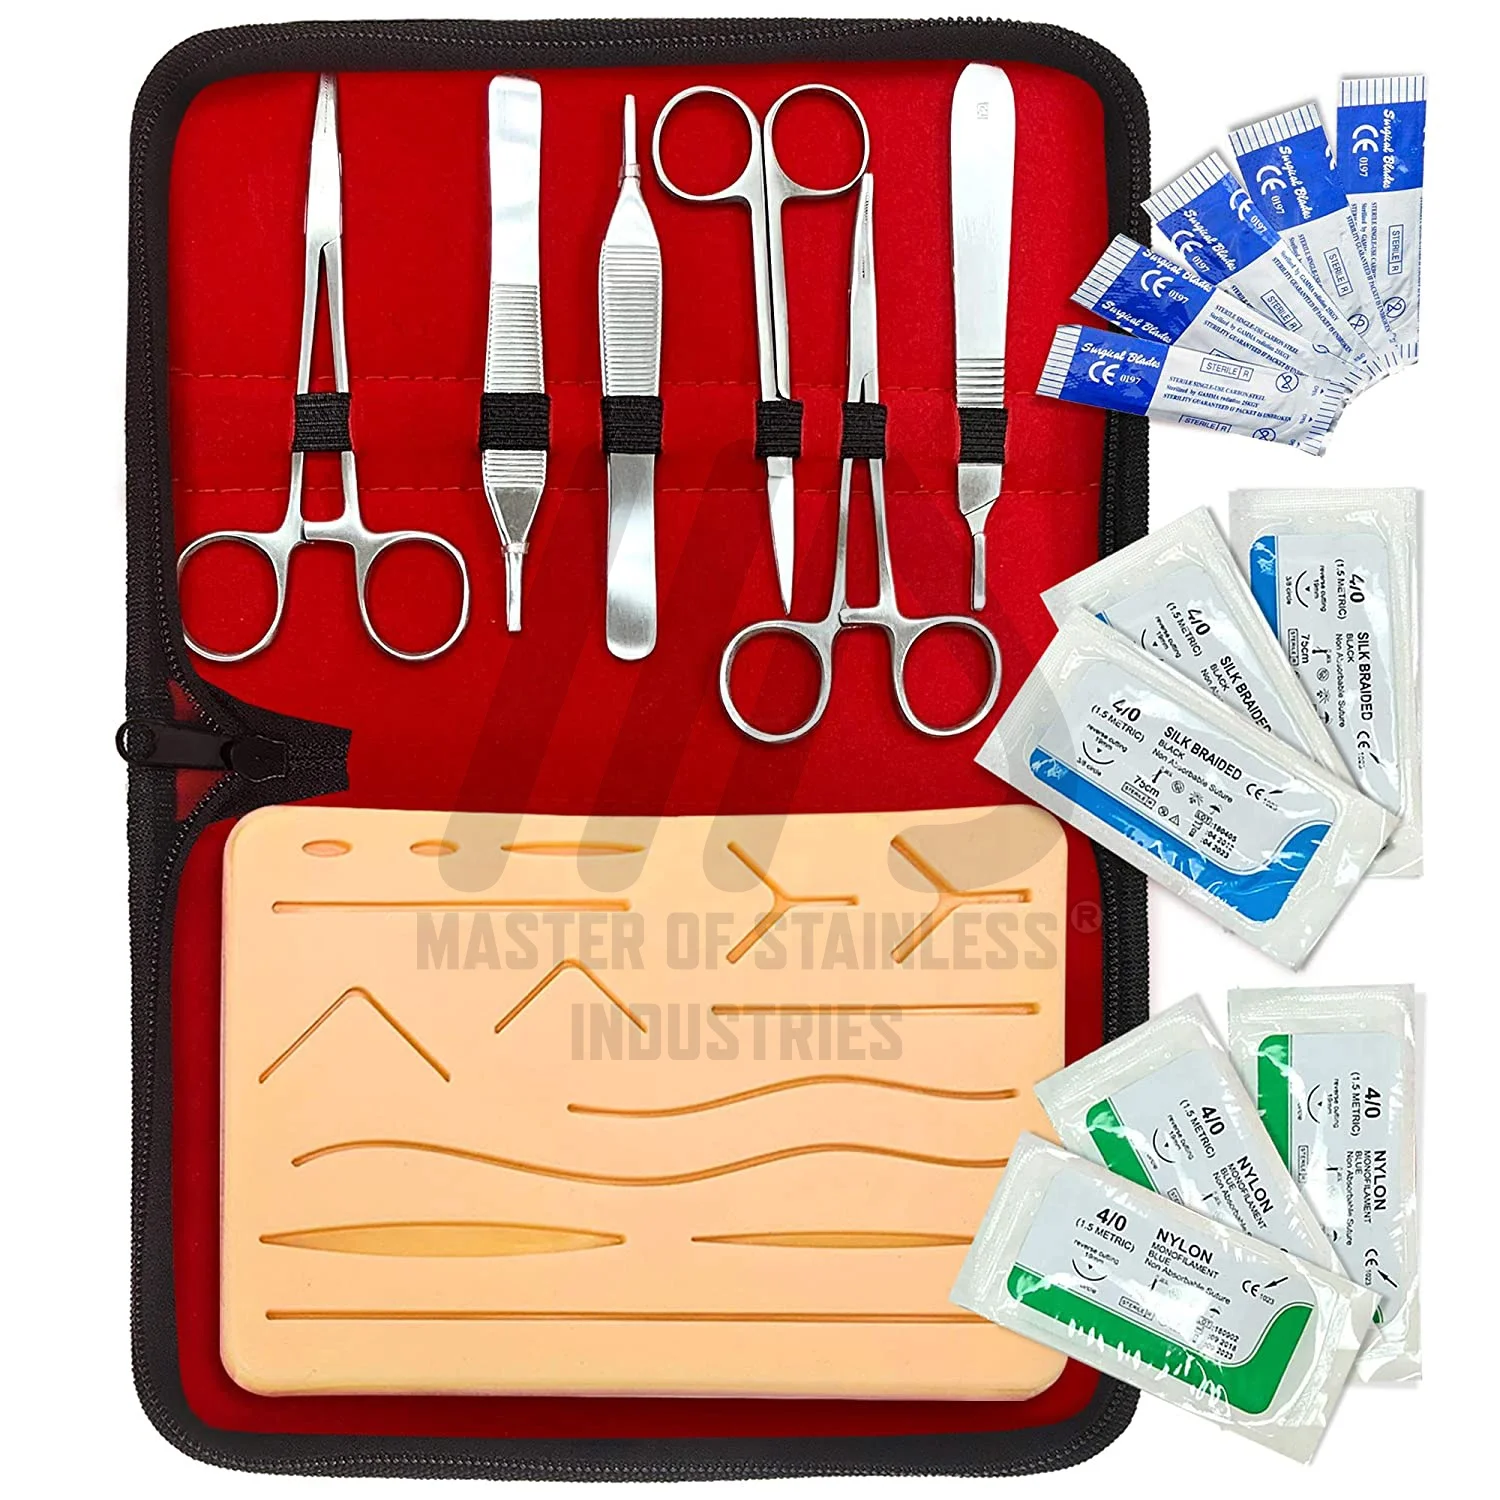 Practice Kit Surgical Instruments Kit Stainless Steel with Case 5 pcs Dissection surgical kit Surgery tools By Master SS